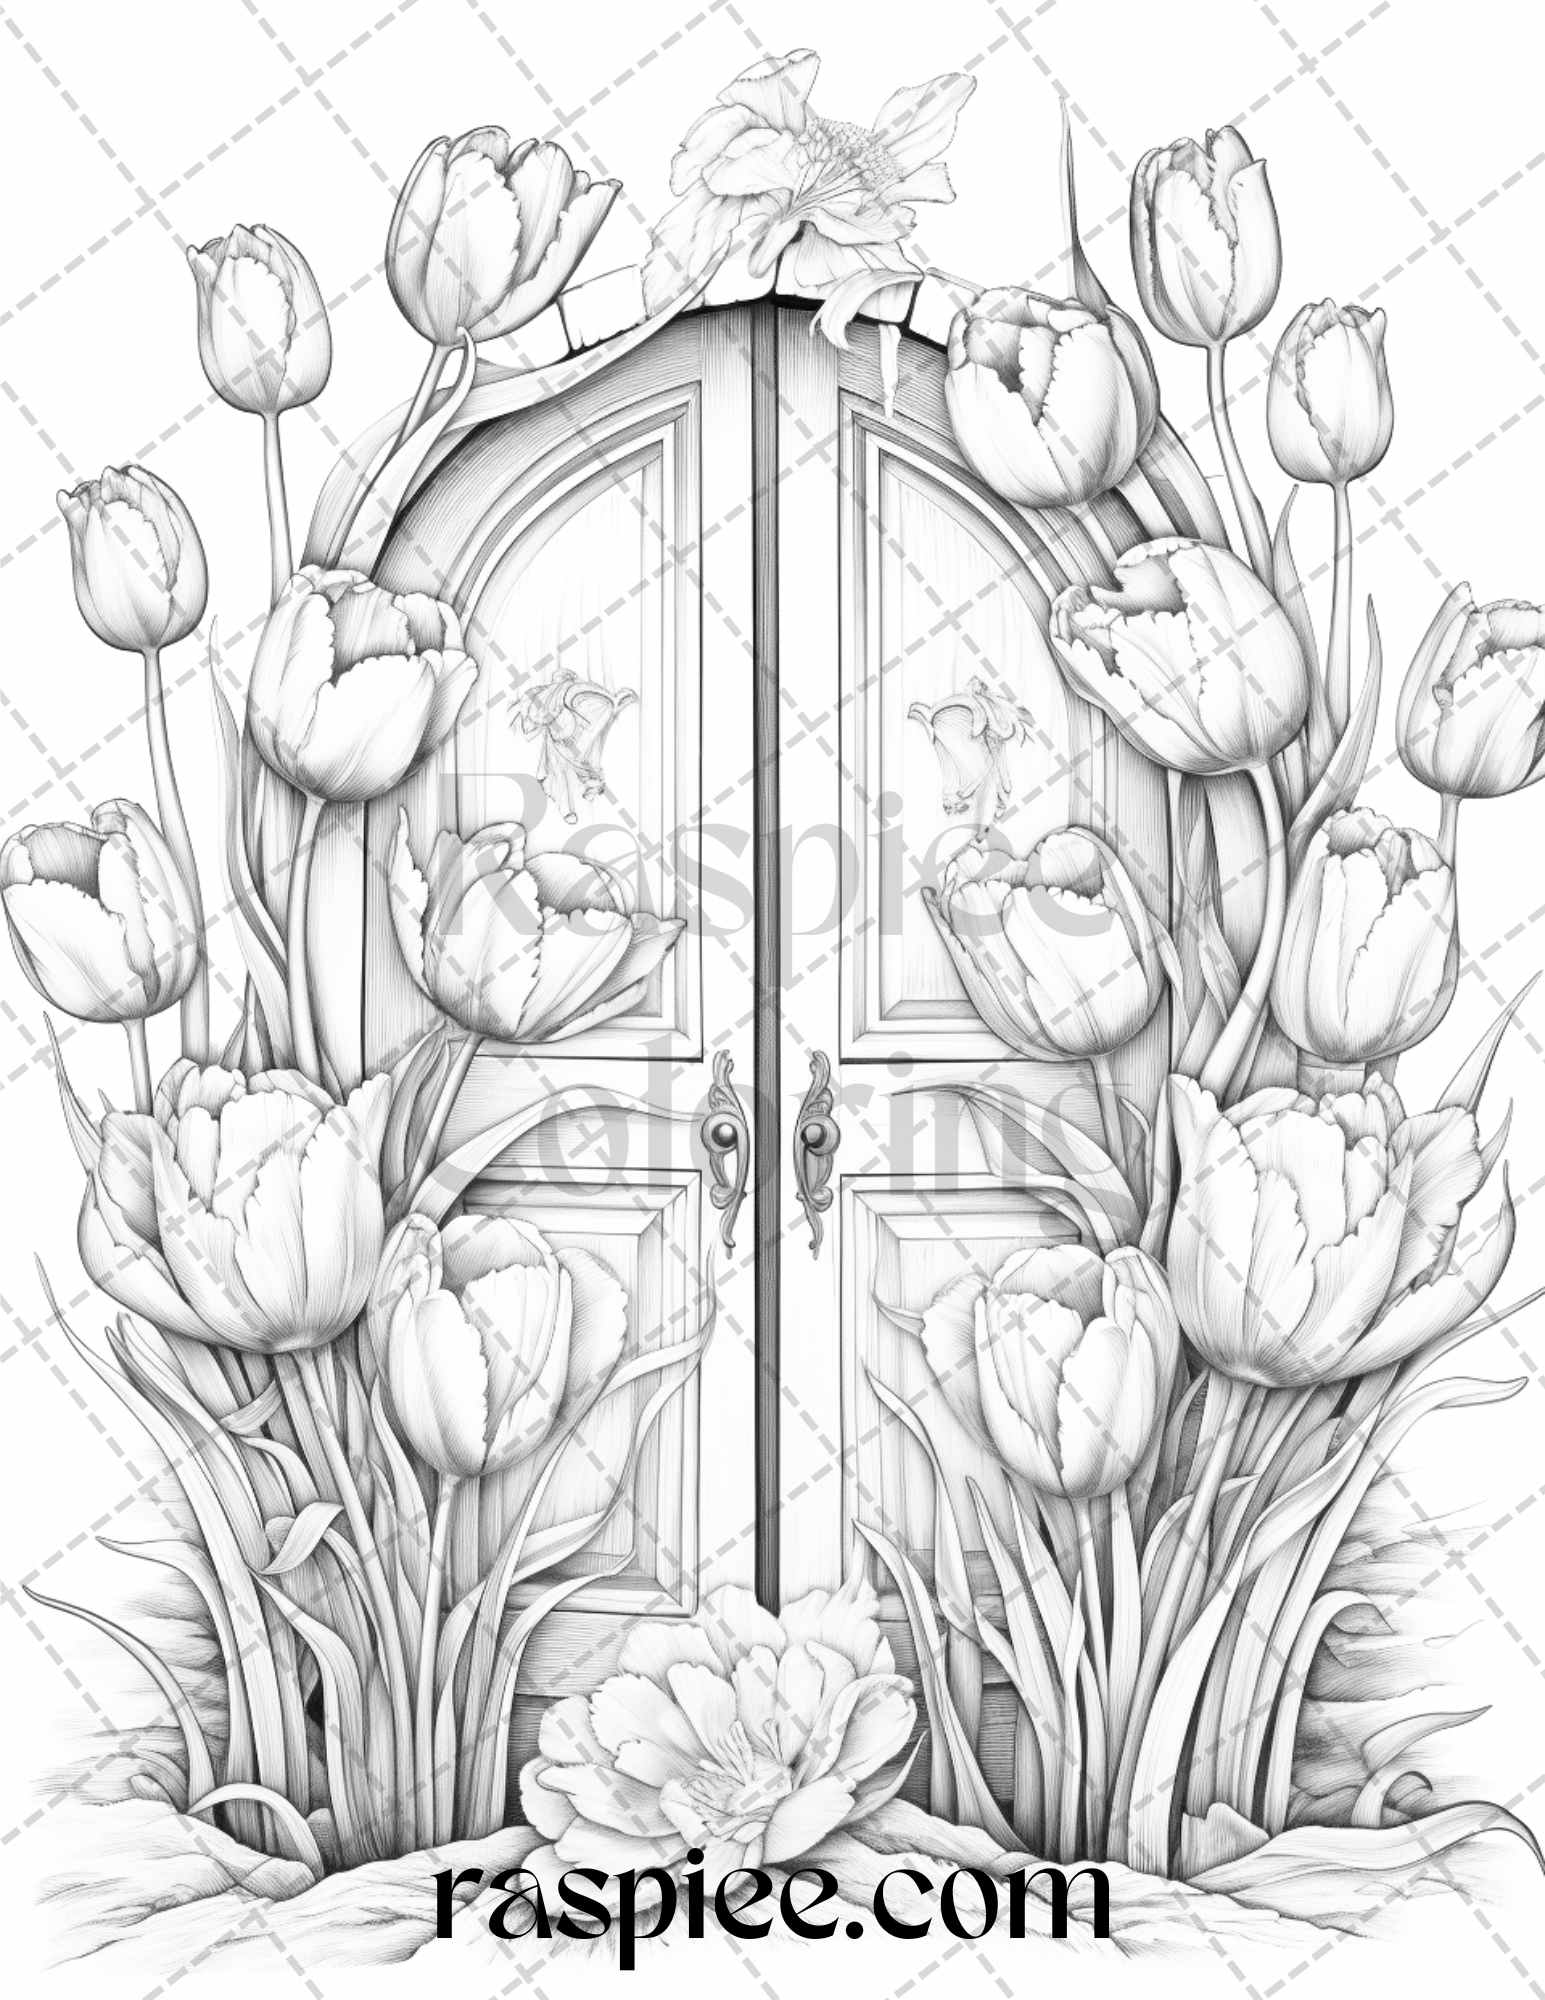 40 Flower Fairy Doors Grayscale Coloring Pages Printable for Adults, PDF File Instant Download - raspiee